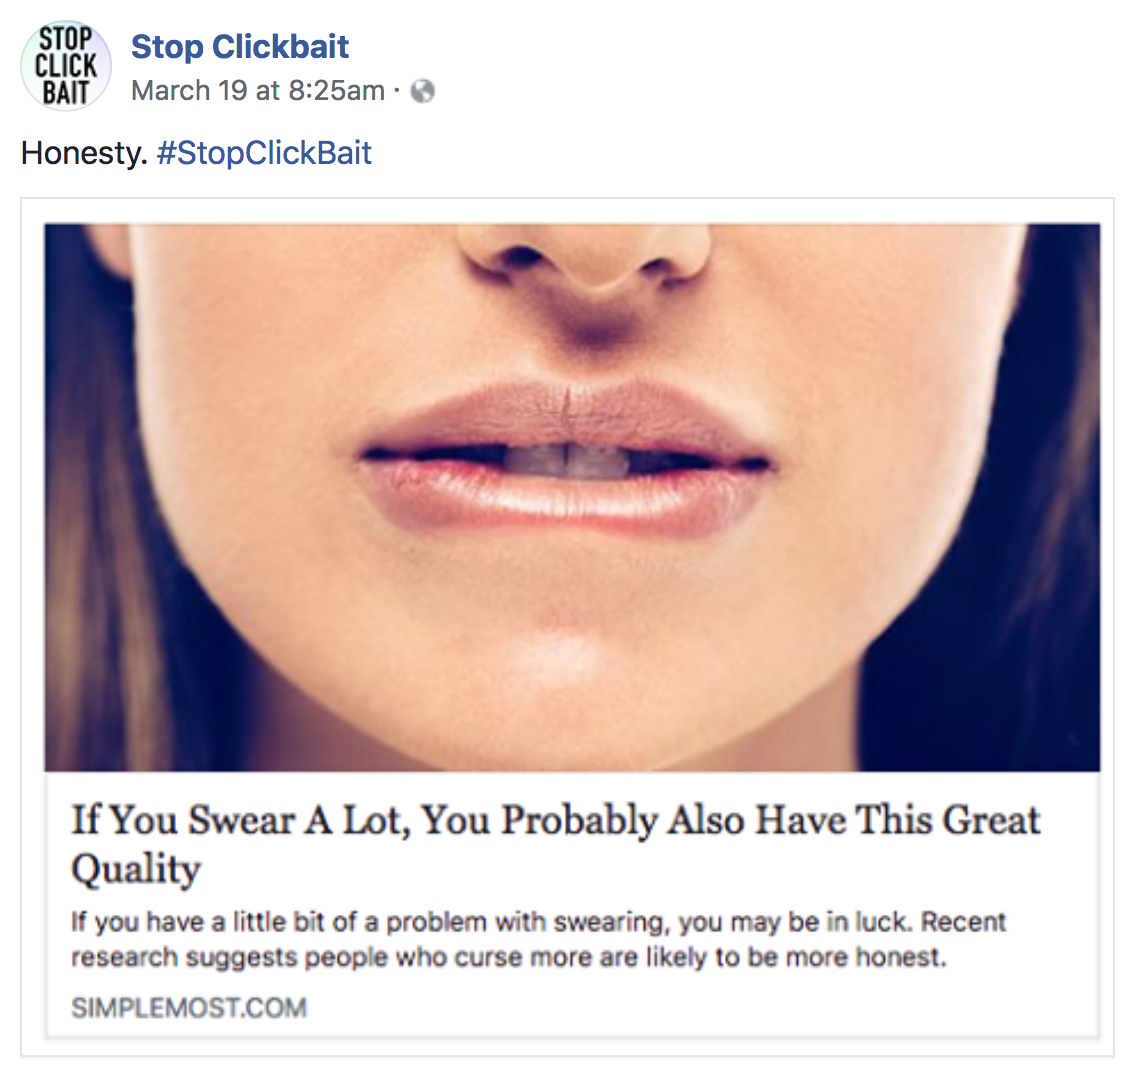 18 Times When 'Stop Clickbait' Saved the Day